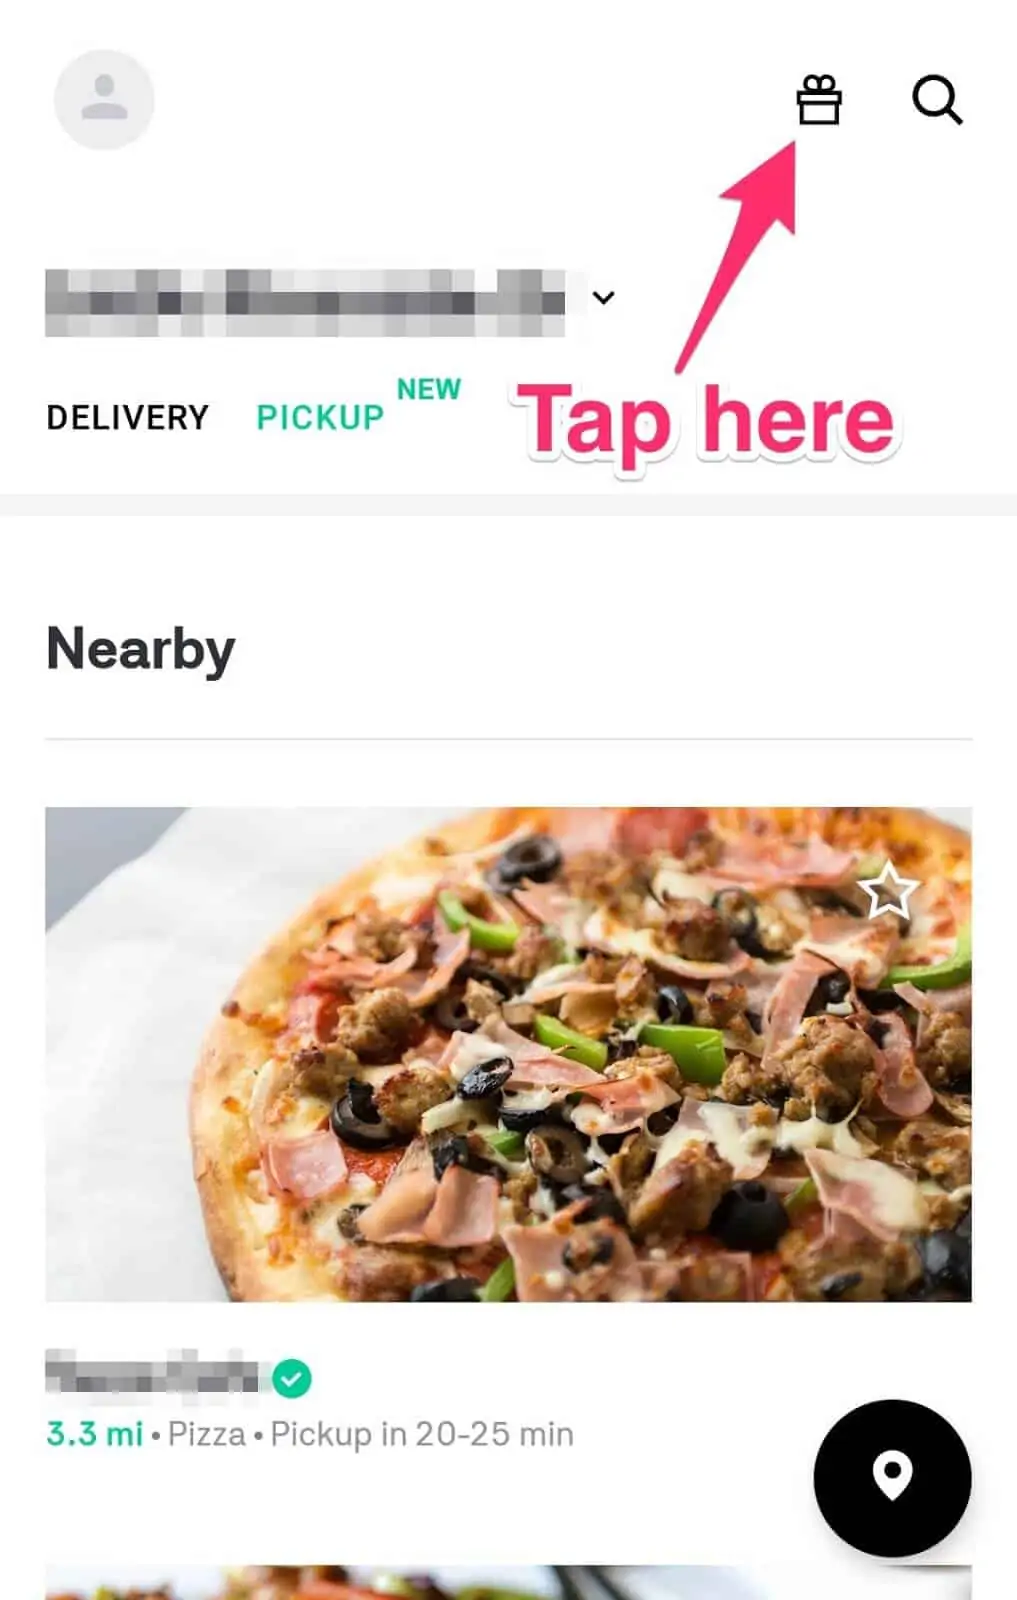 Postmates Promo Code for Existing Users